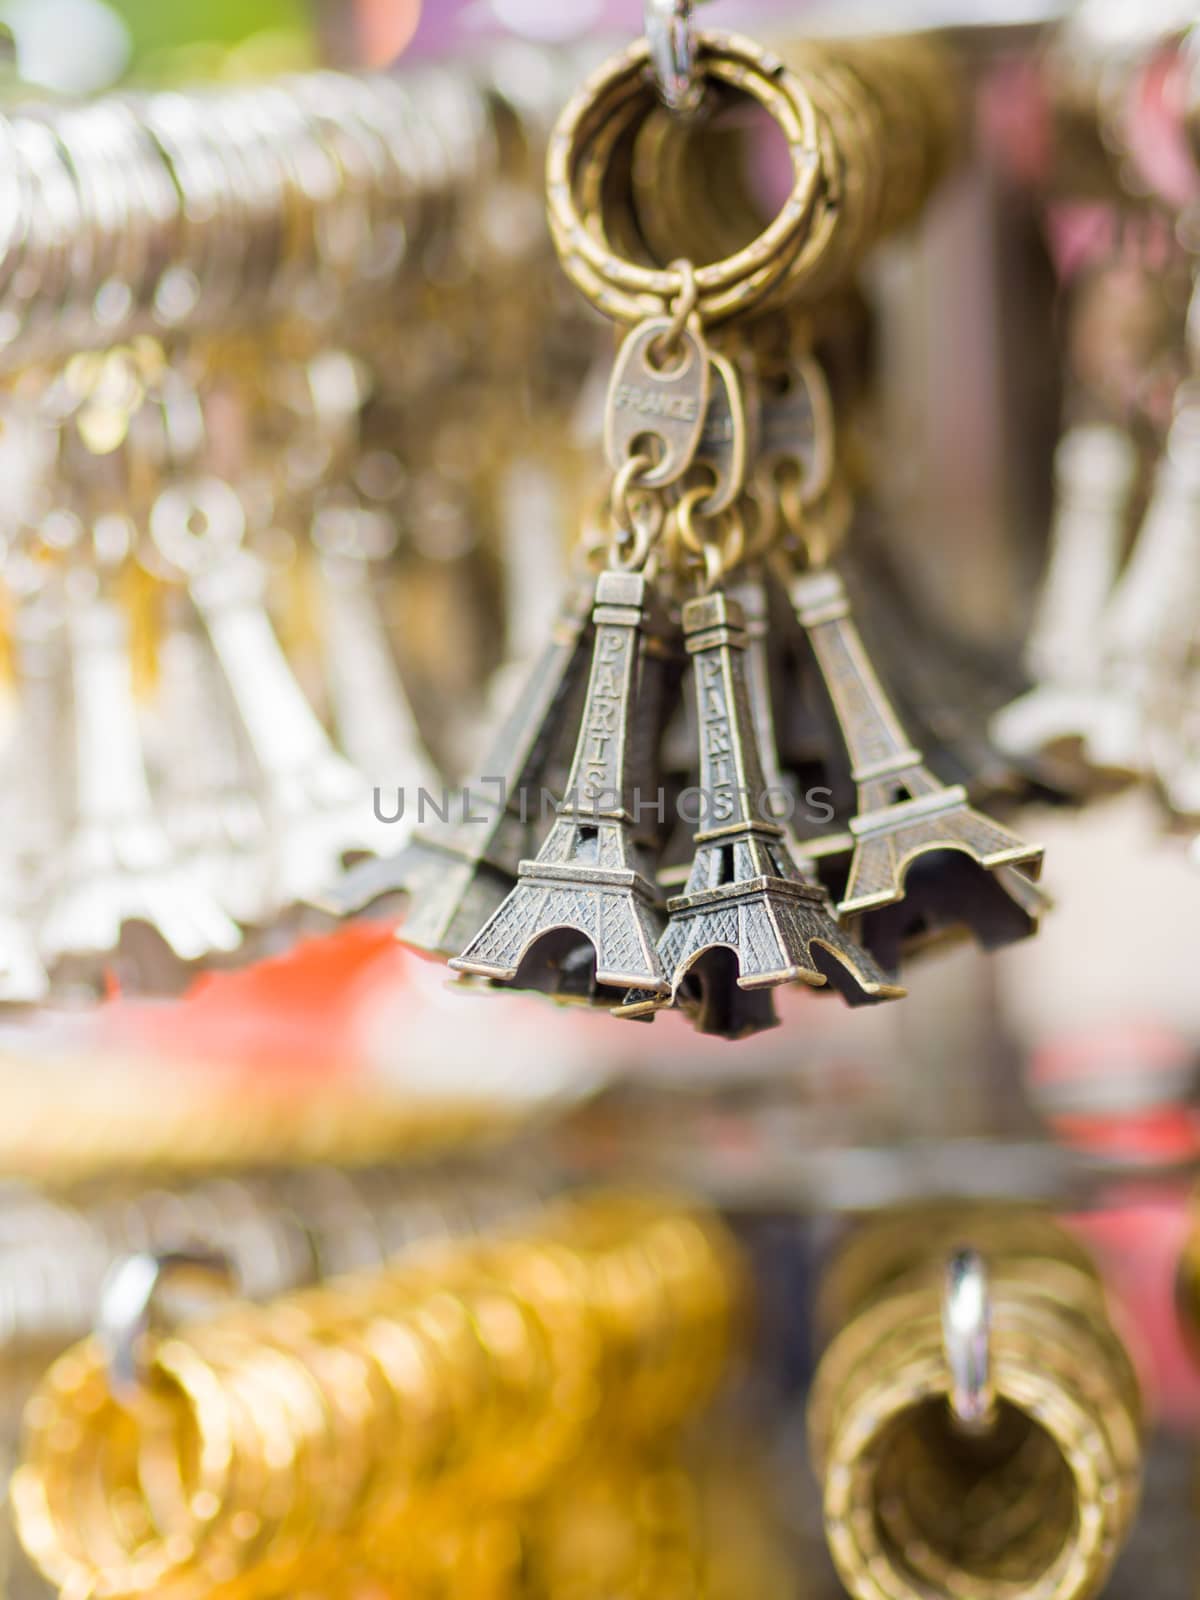 Eiffel tower key chains at the shop in Paris  by Netfalls